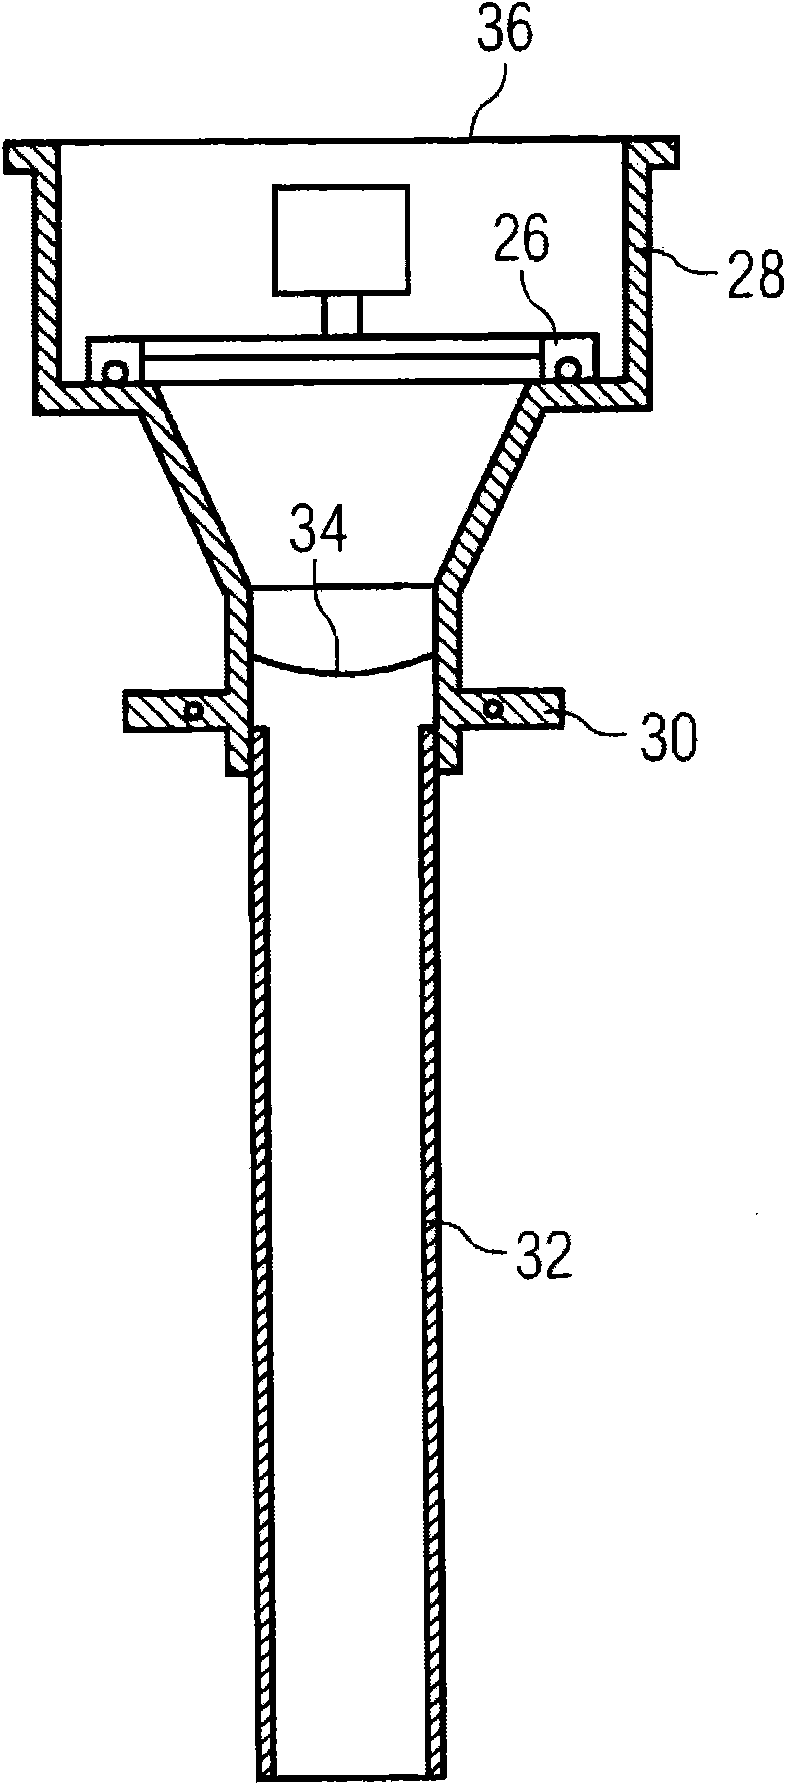 Superconducting magnet cryogen quench path outlet assembly or method